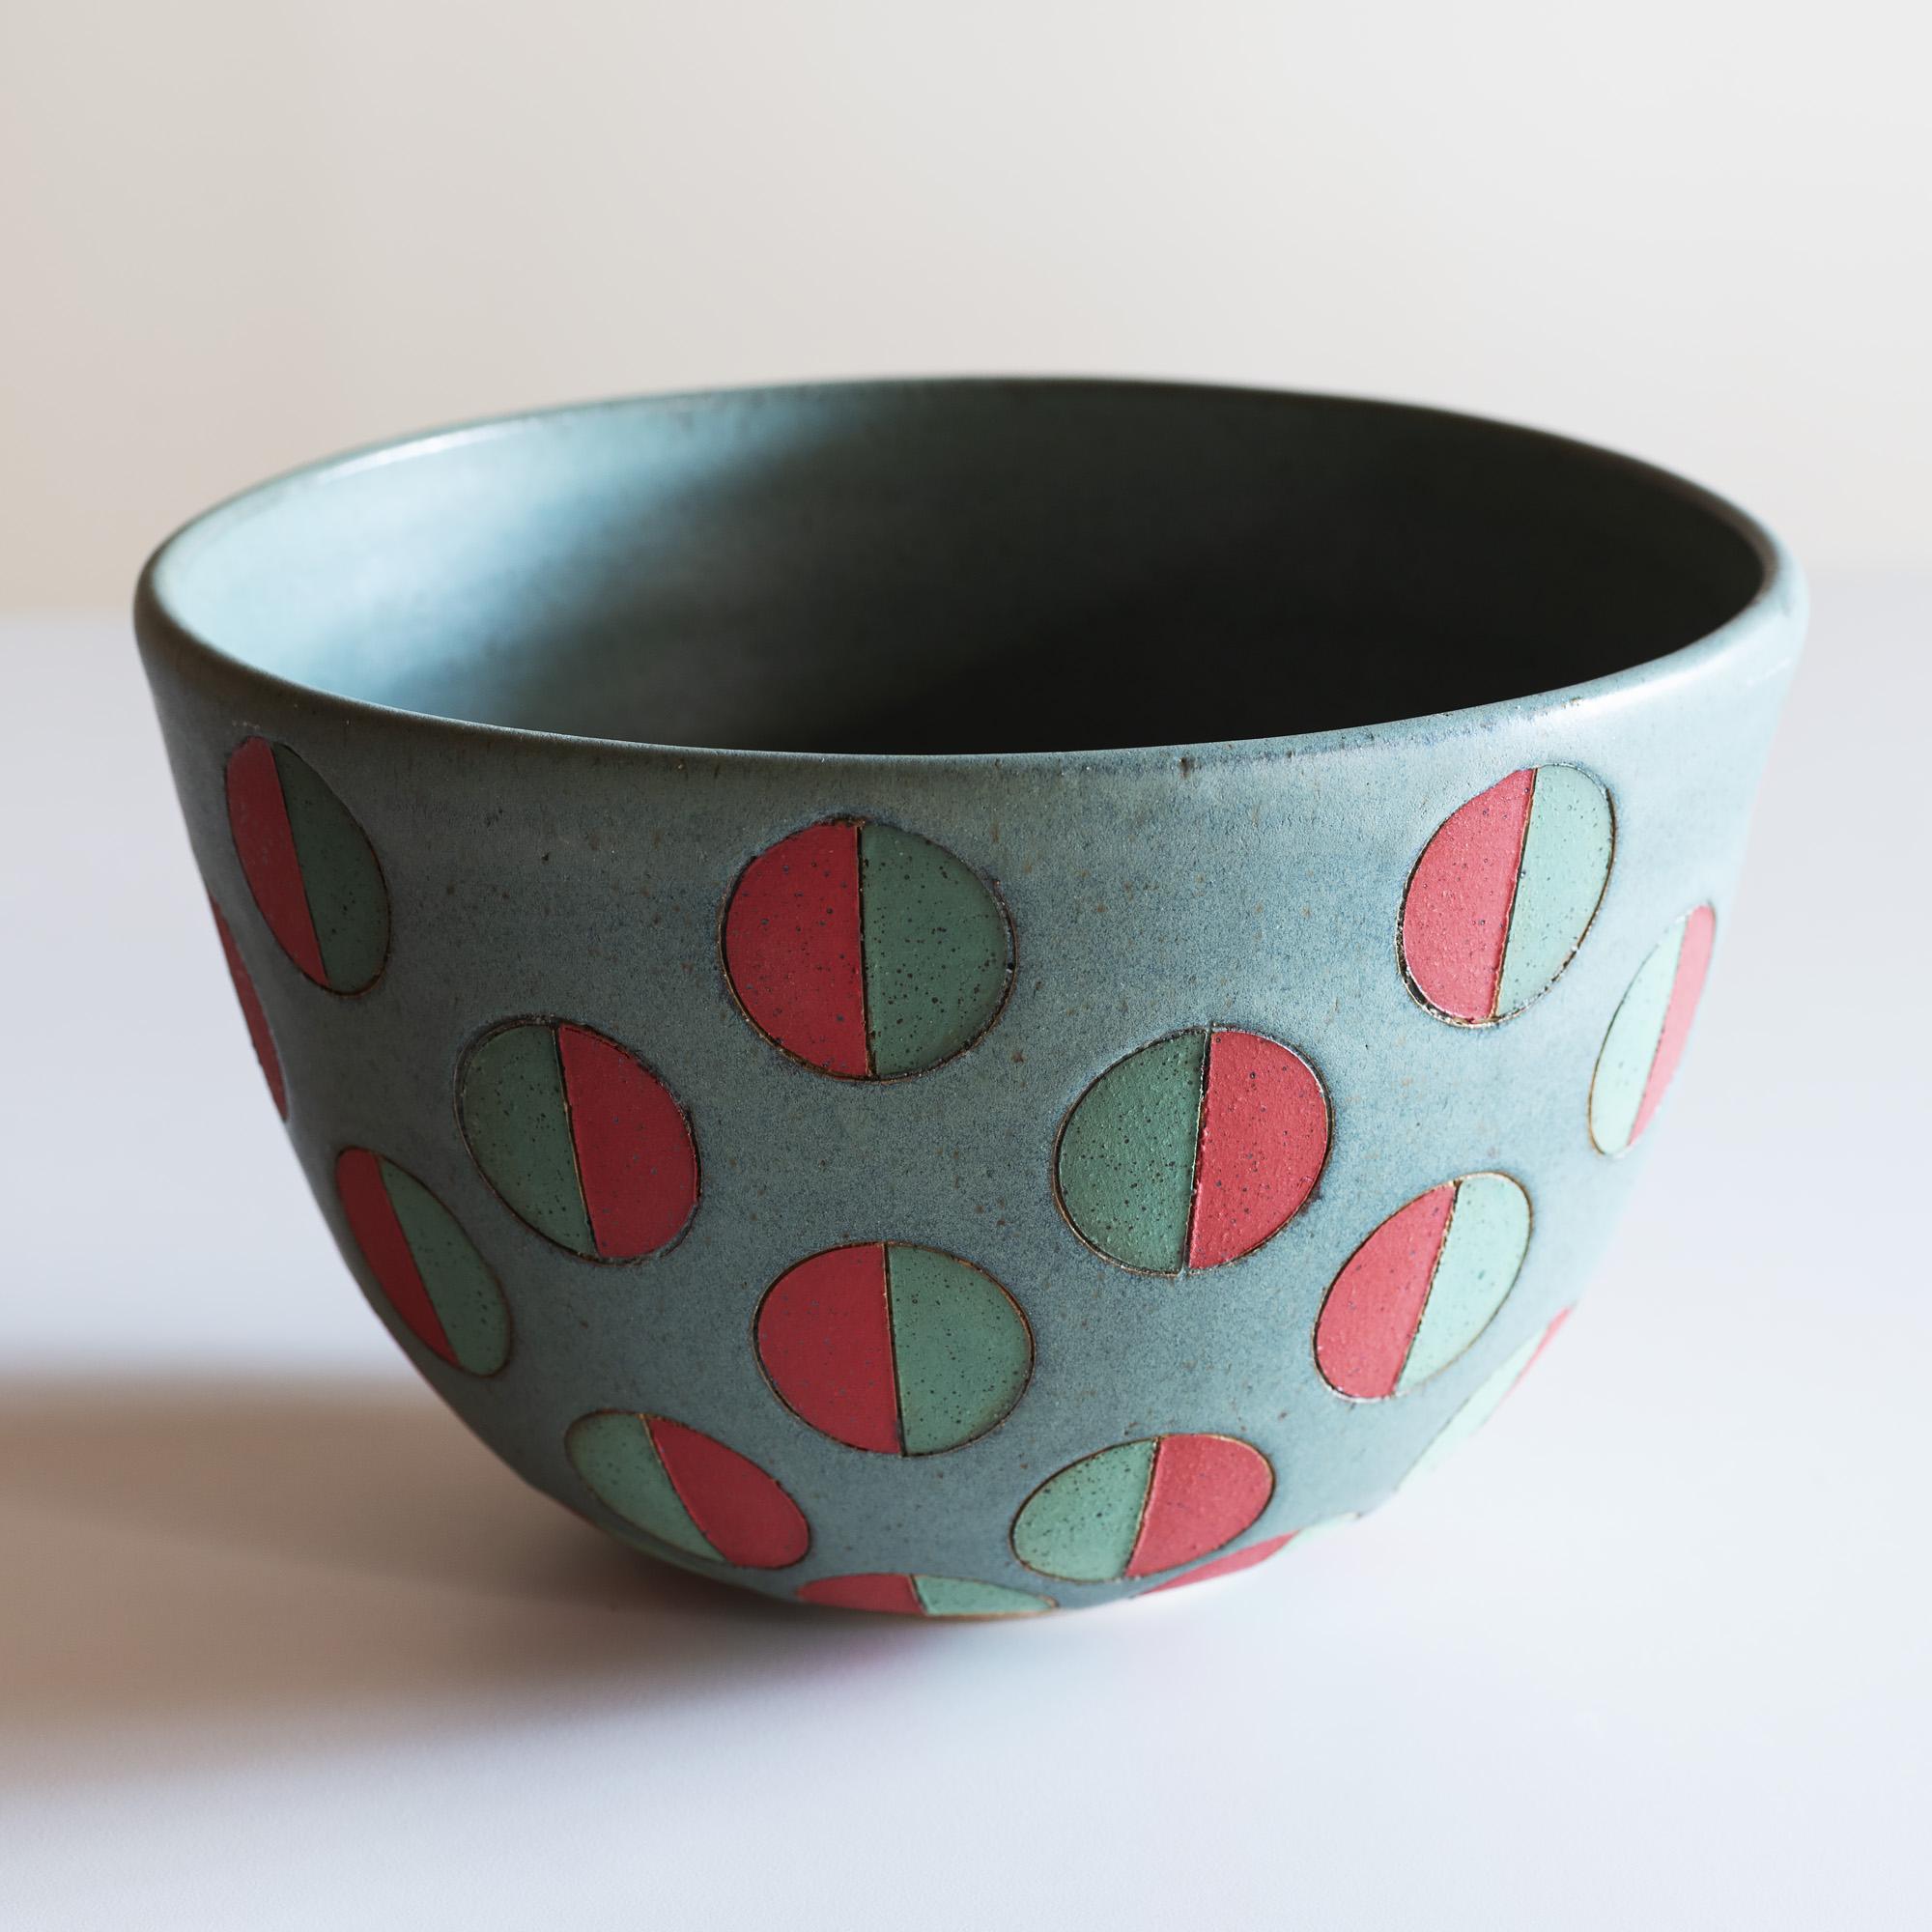 Handsome, large stoneware vessel with split polka dots in green and red.